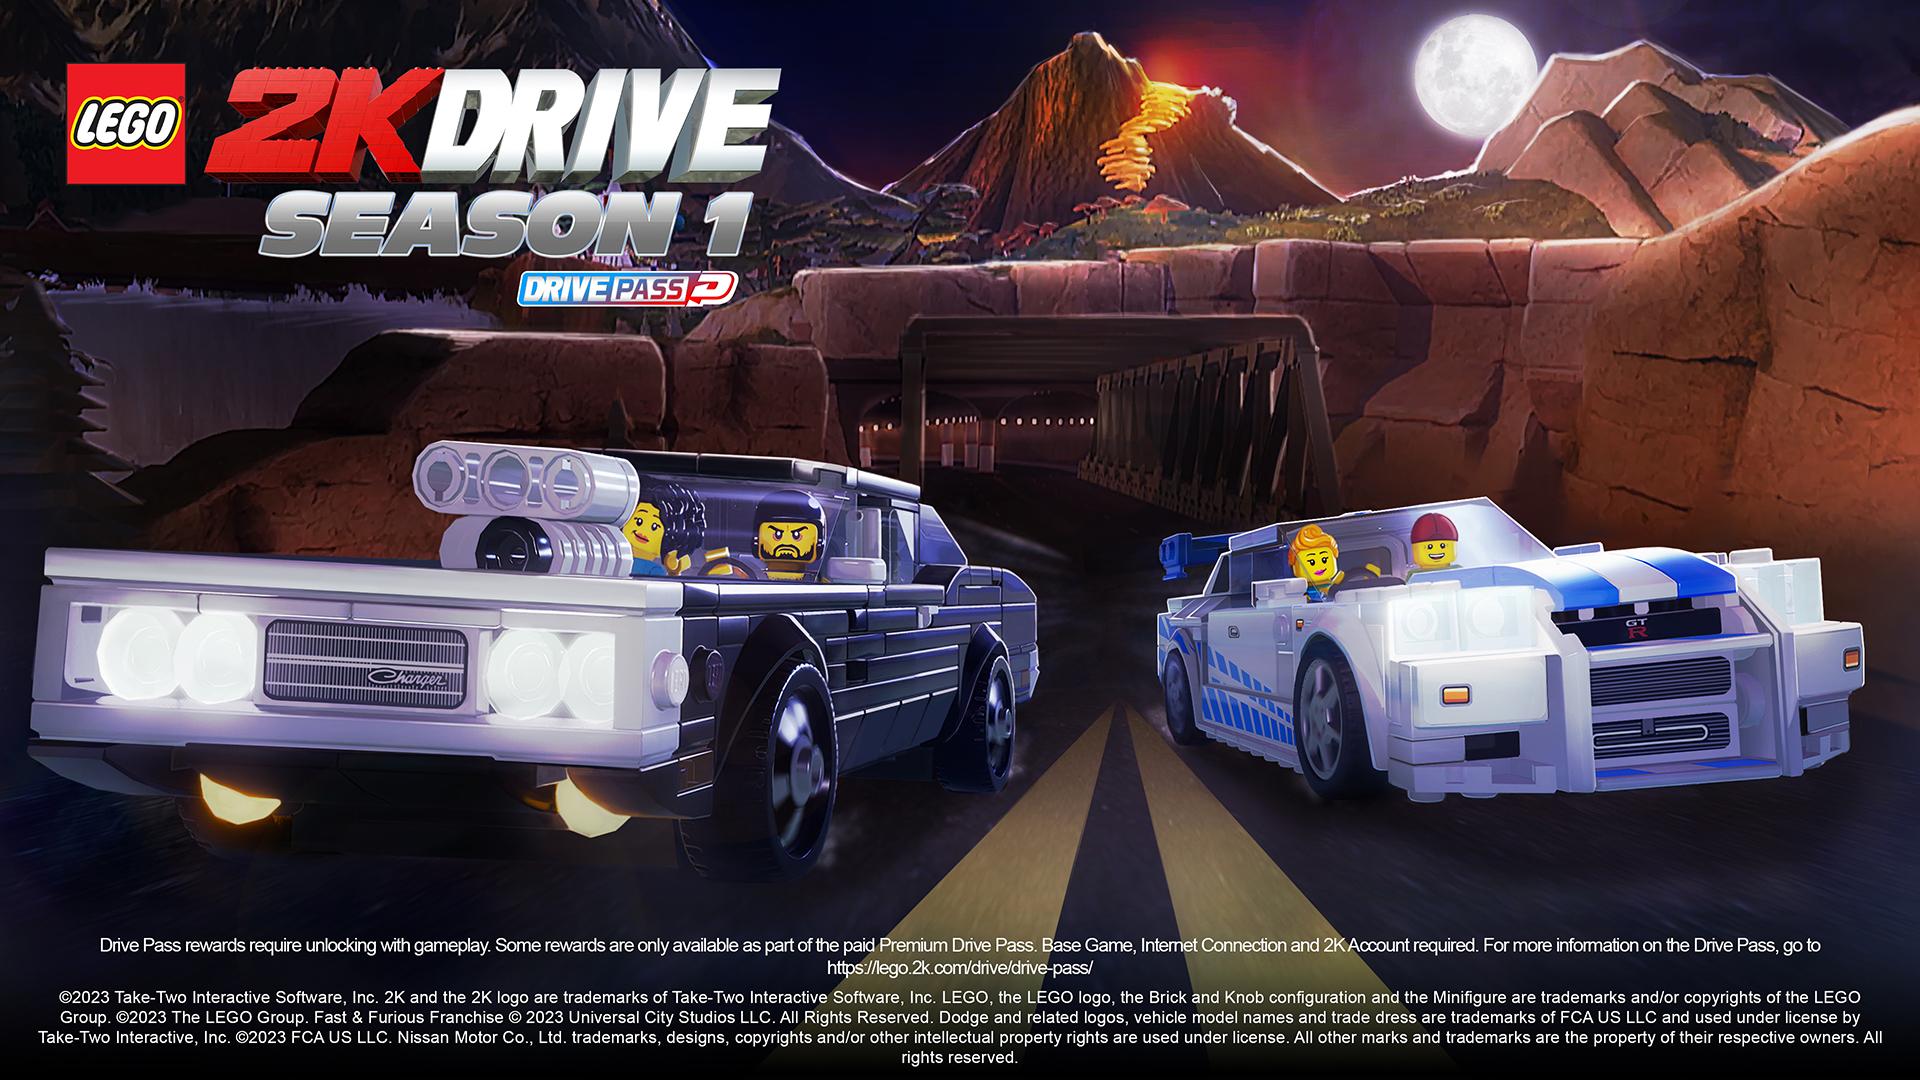 LEGO 2K Drive Announces Drive Pass Season 1 Releasing This Wednesday